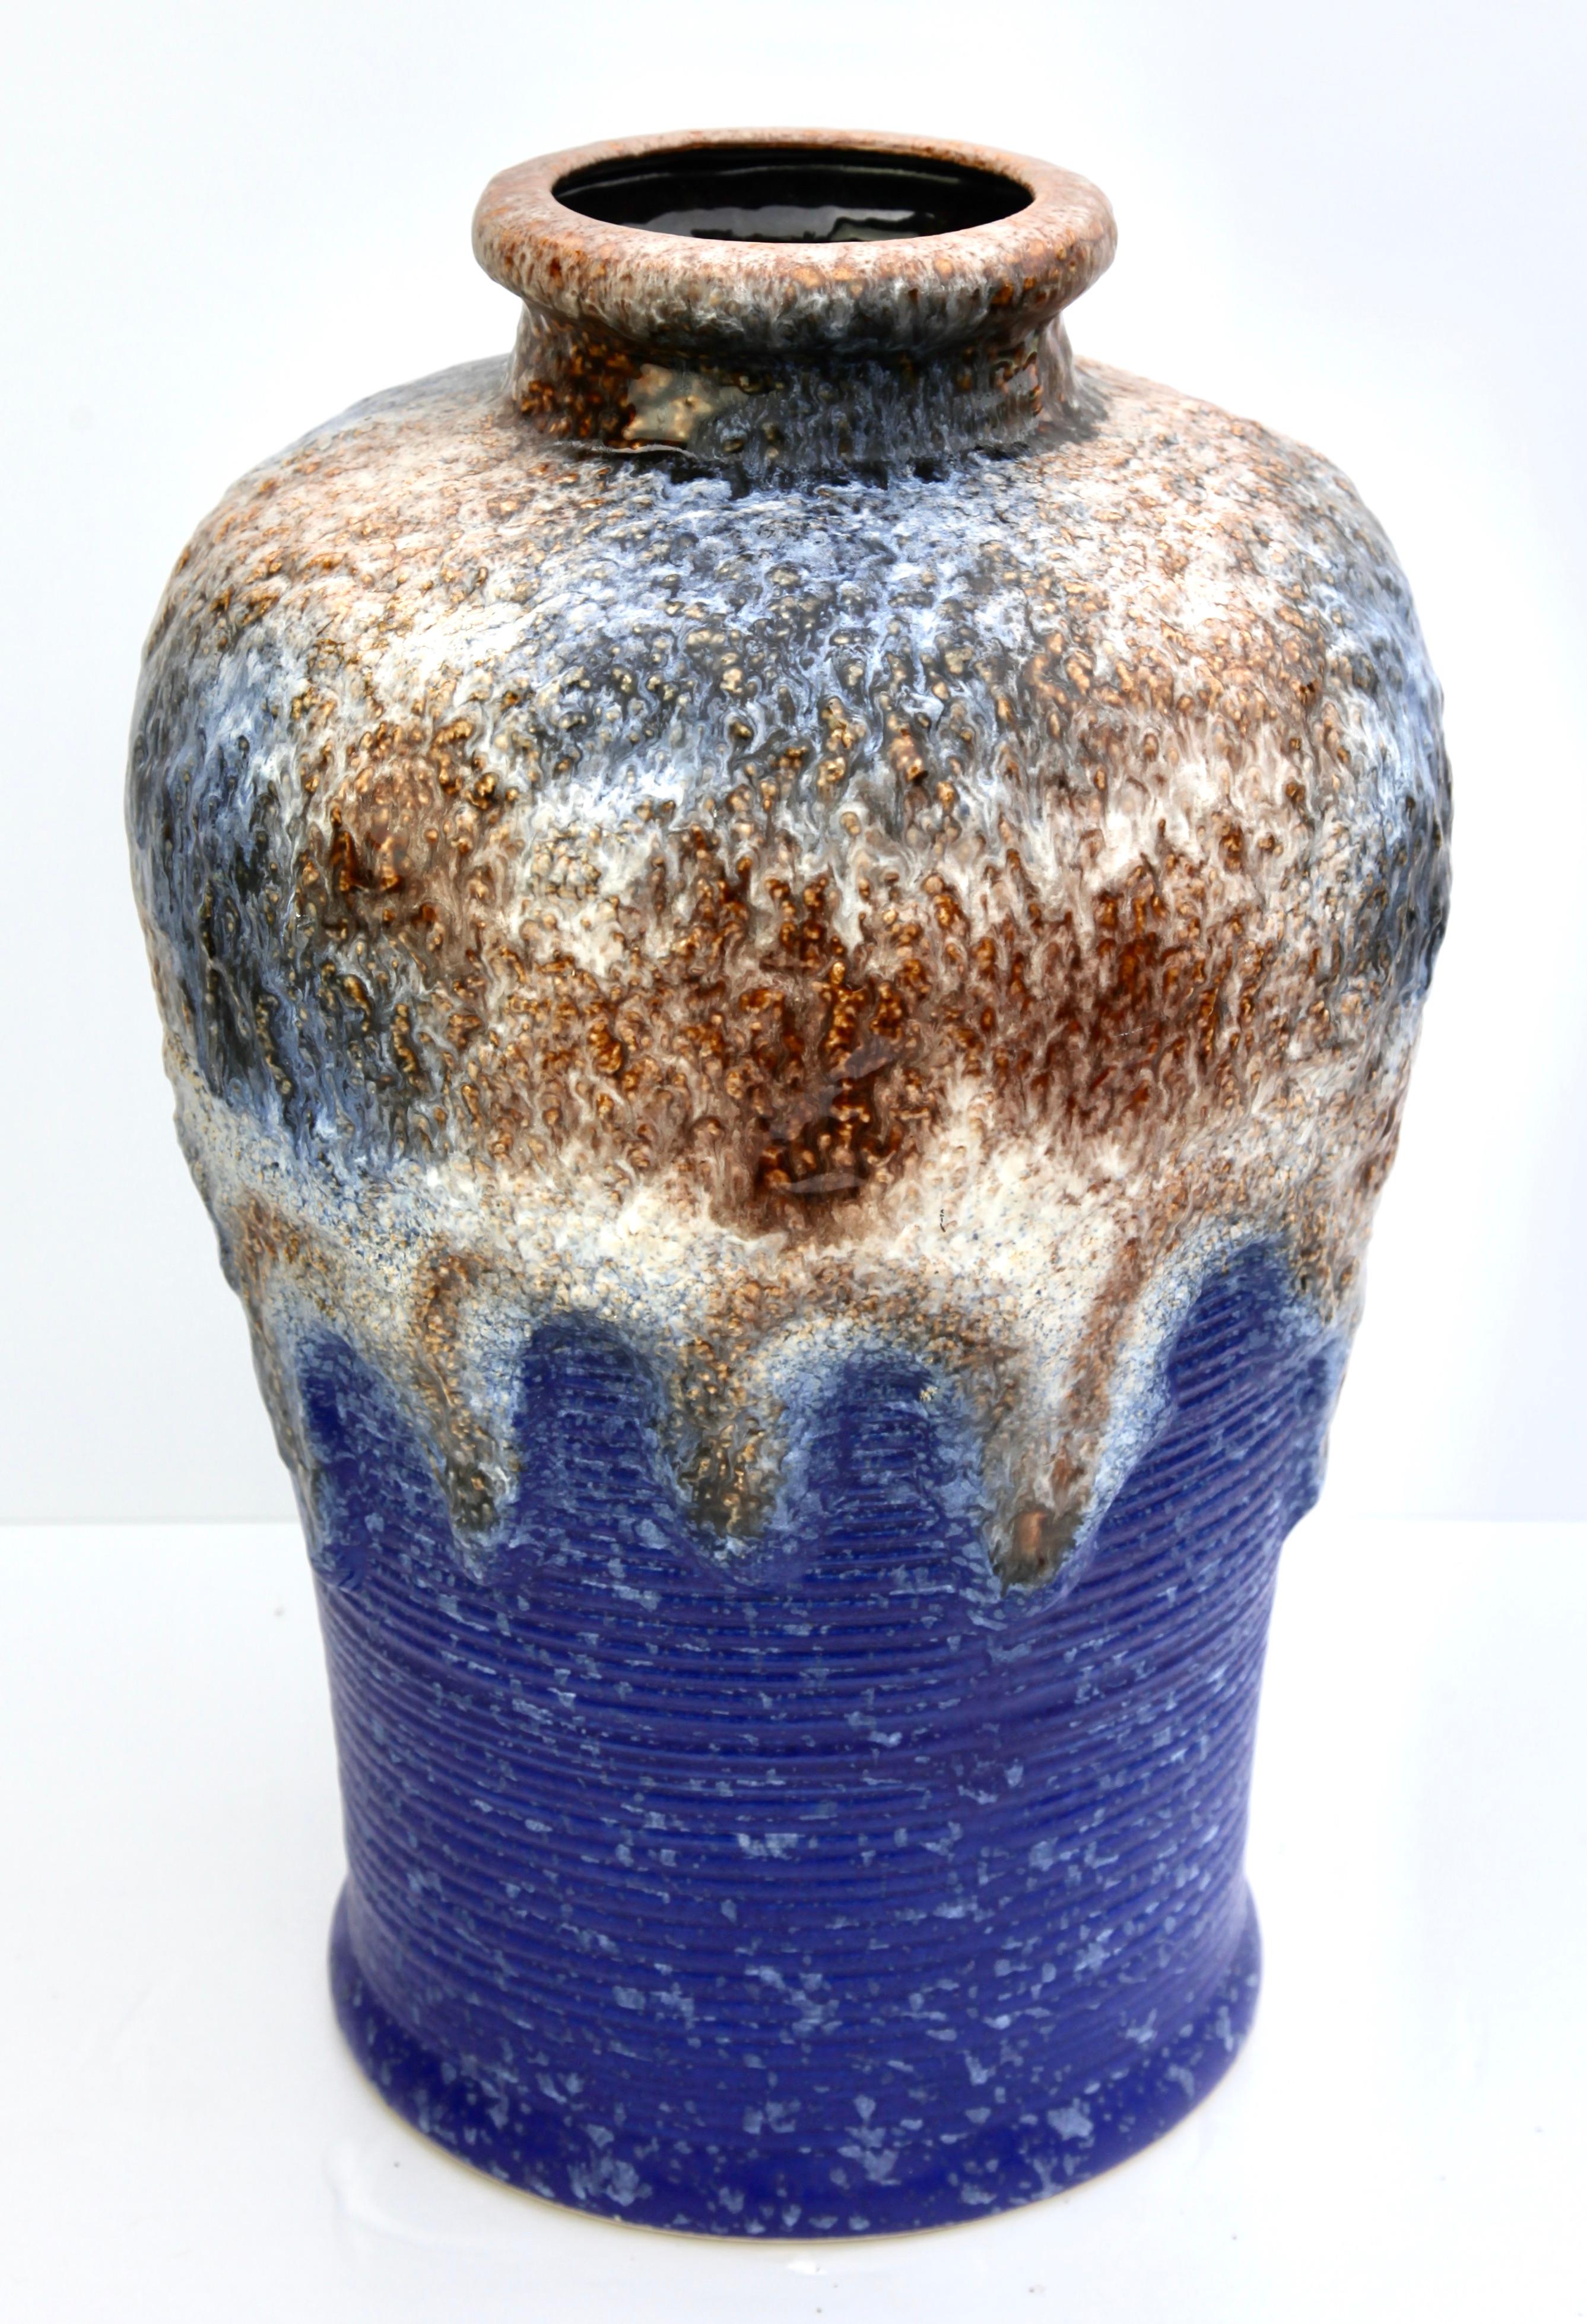 Fat lava floor vase with a rarely-seen form and decor. Heavy ridged body being deluged under a very thick layer of white and brown lava including iridescent/cristalline grains.
An unusual combination of colors and surfaces made by Dumler & Breiden